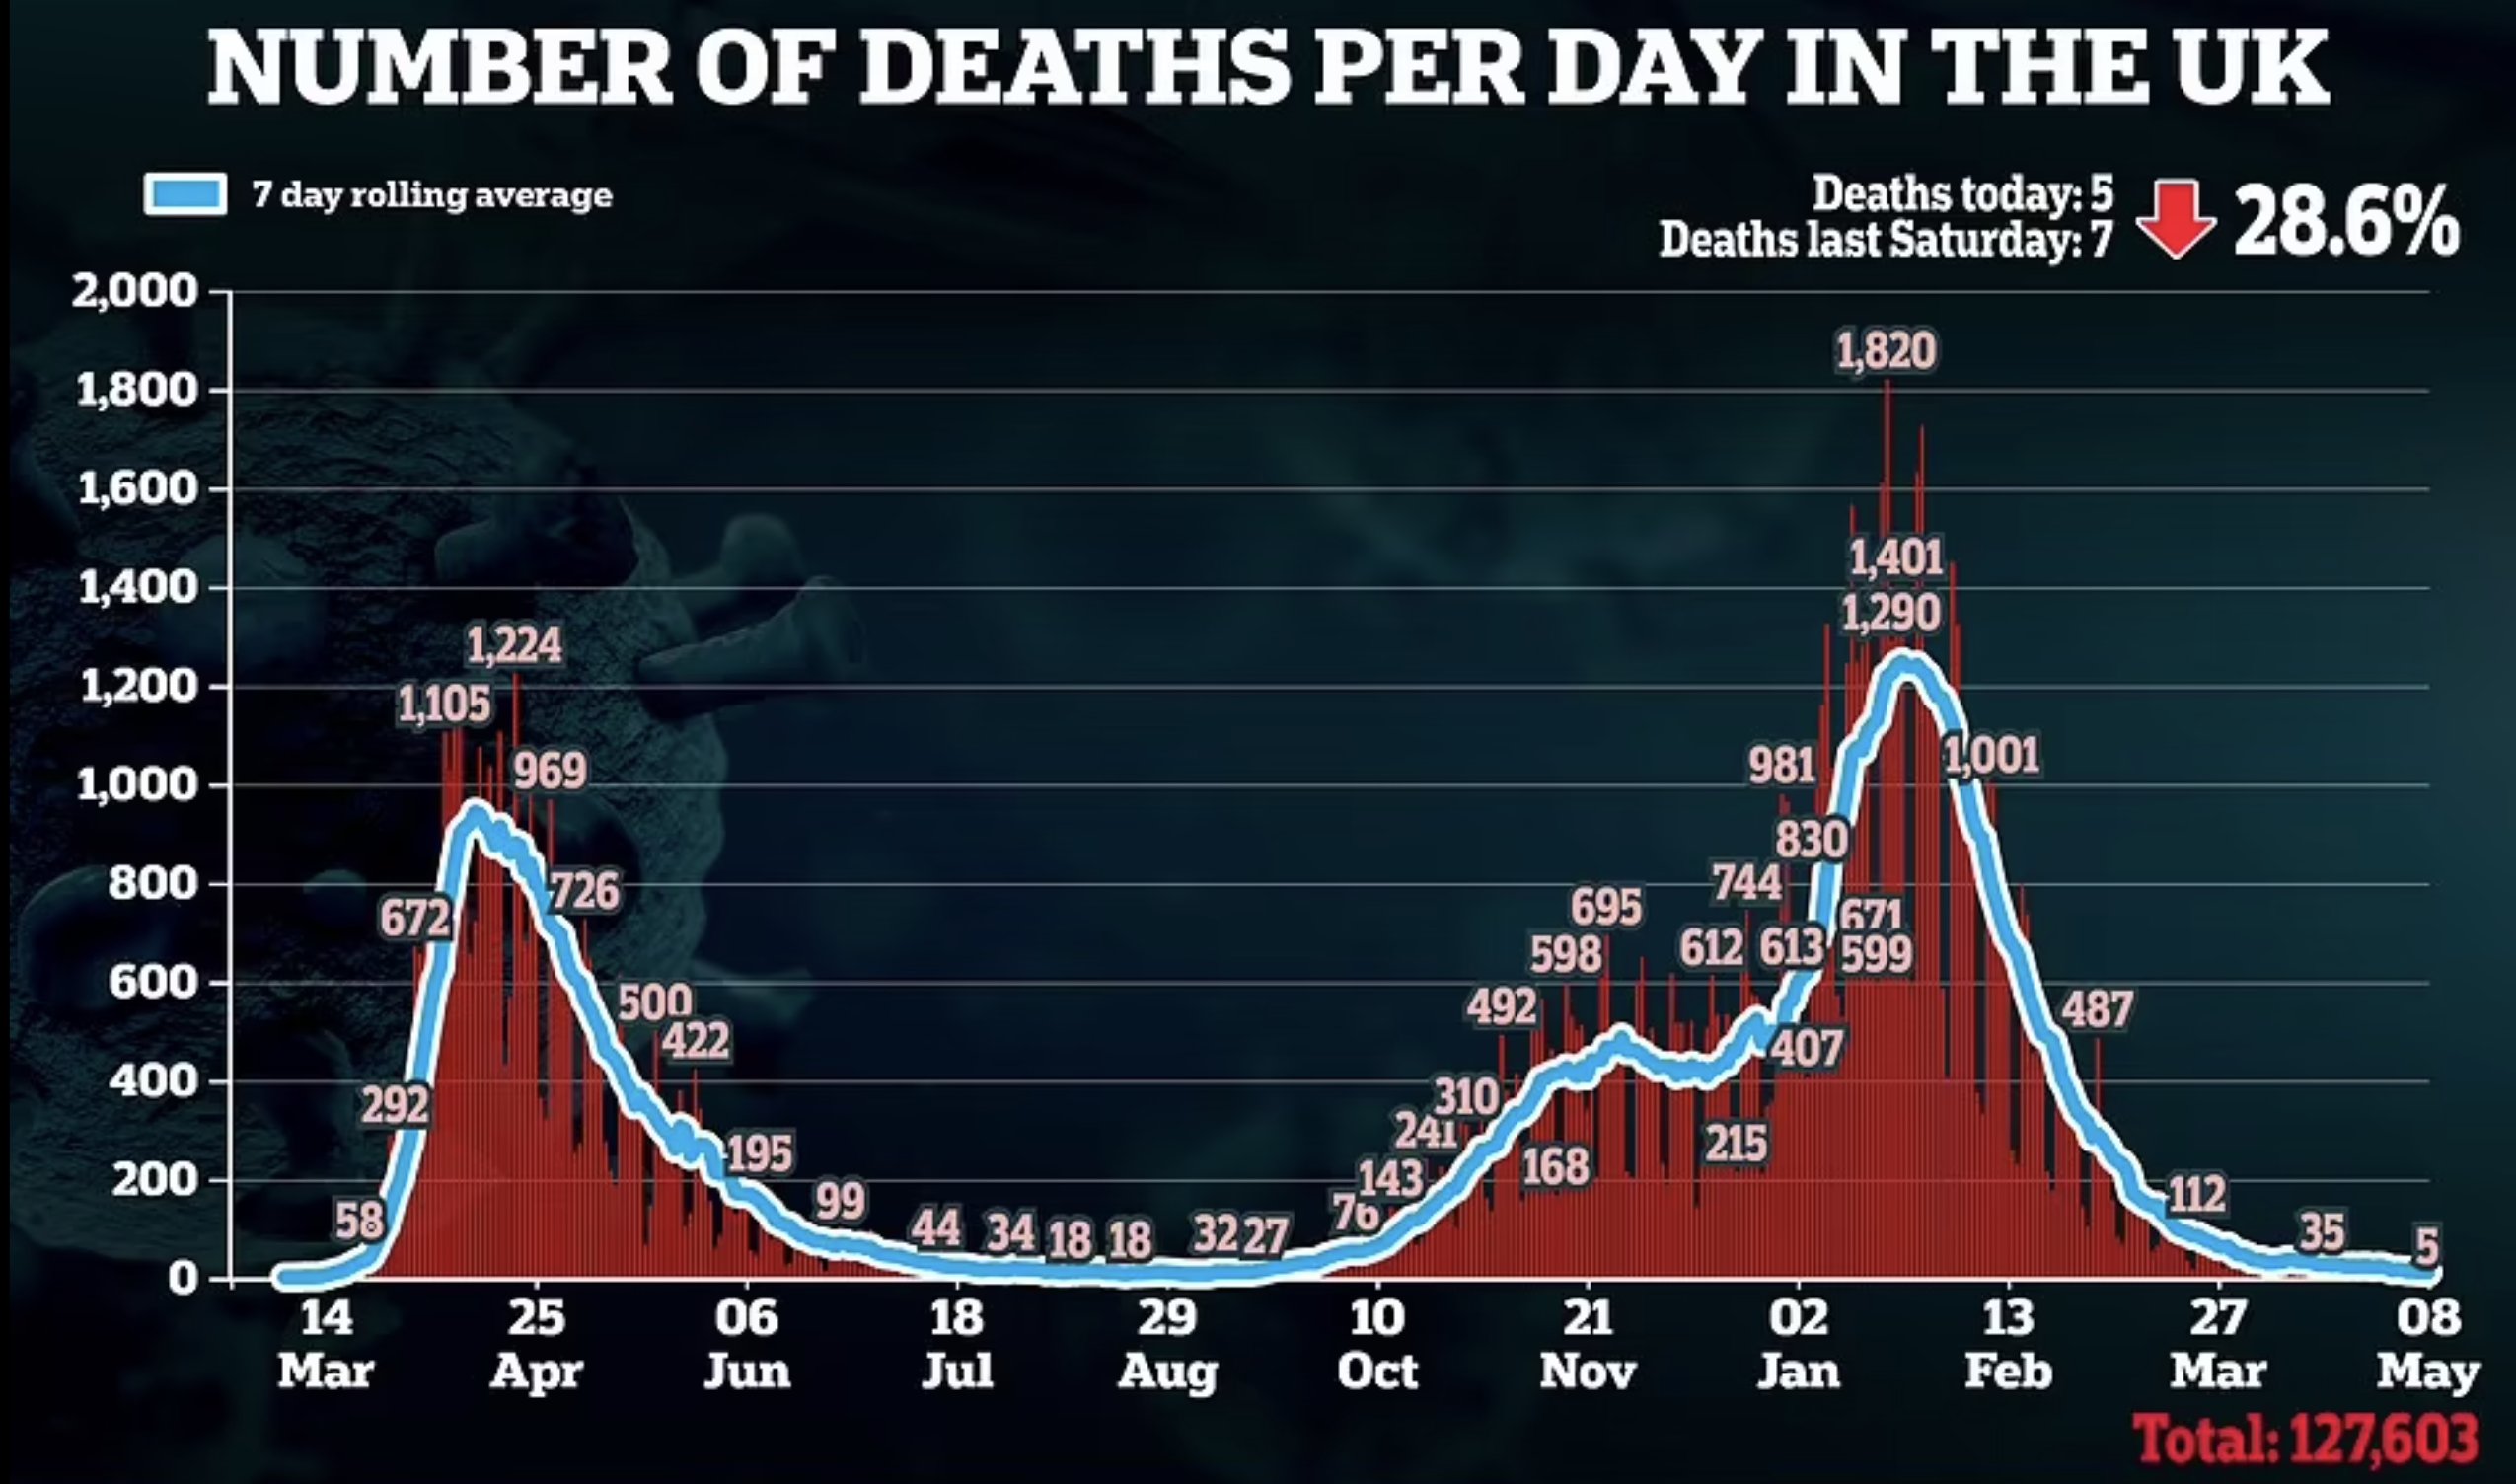 Deaths today